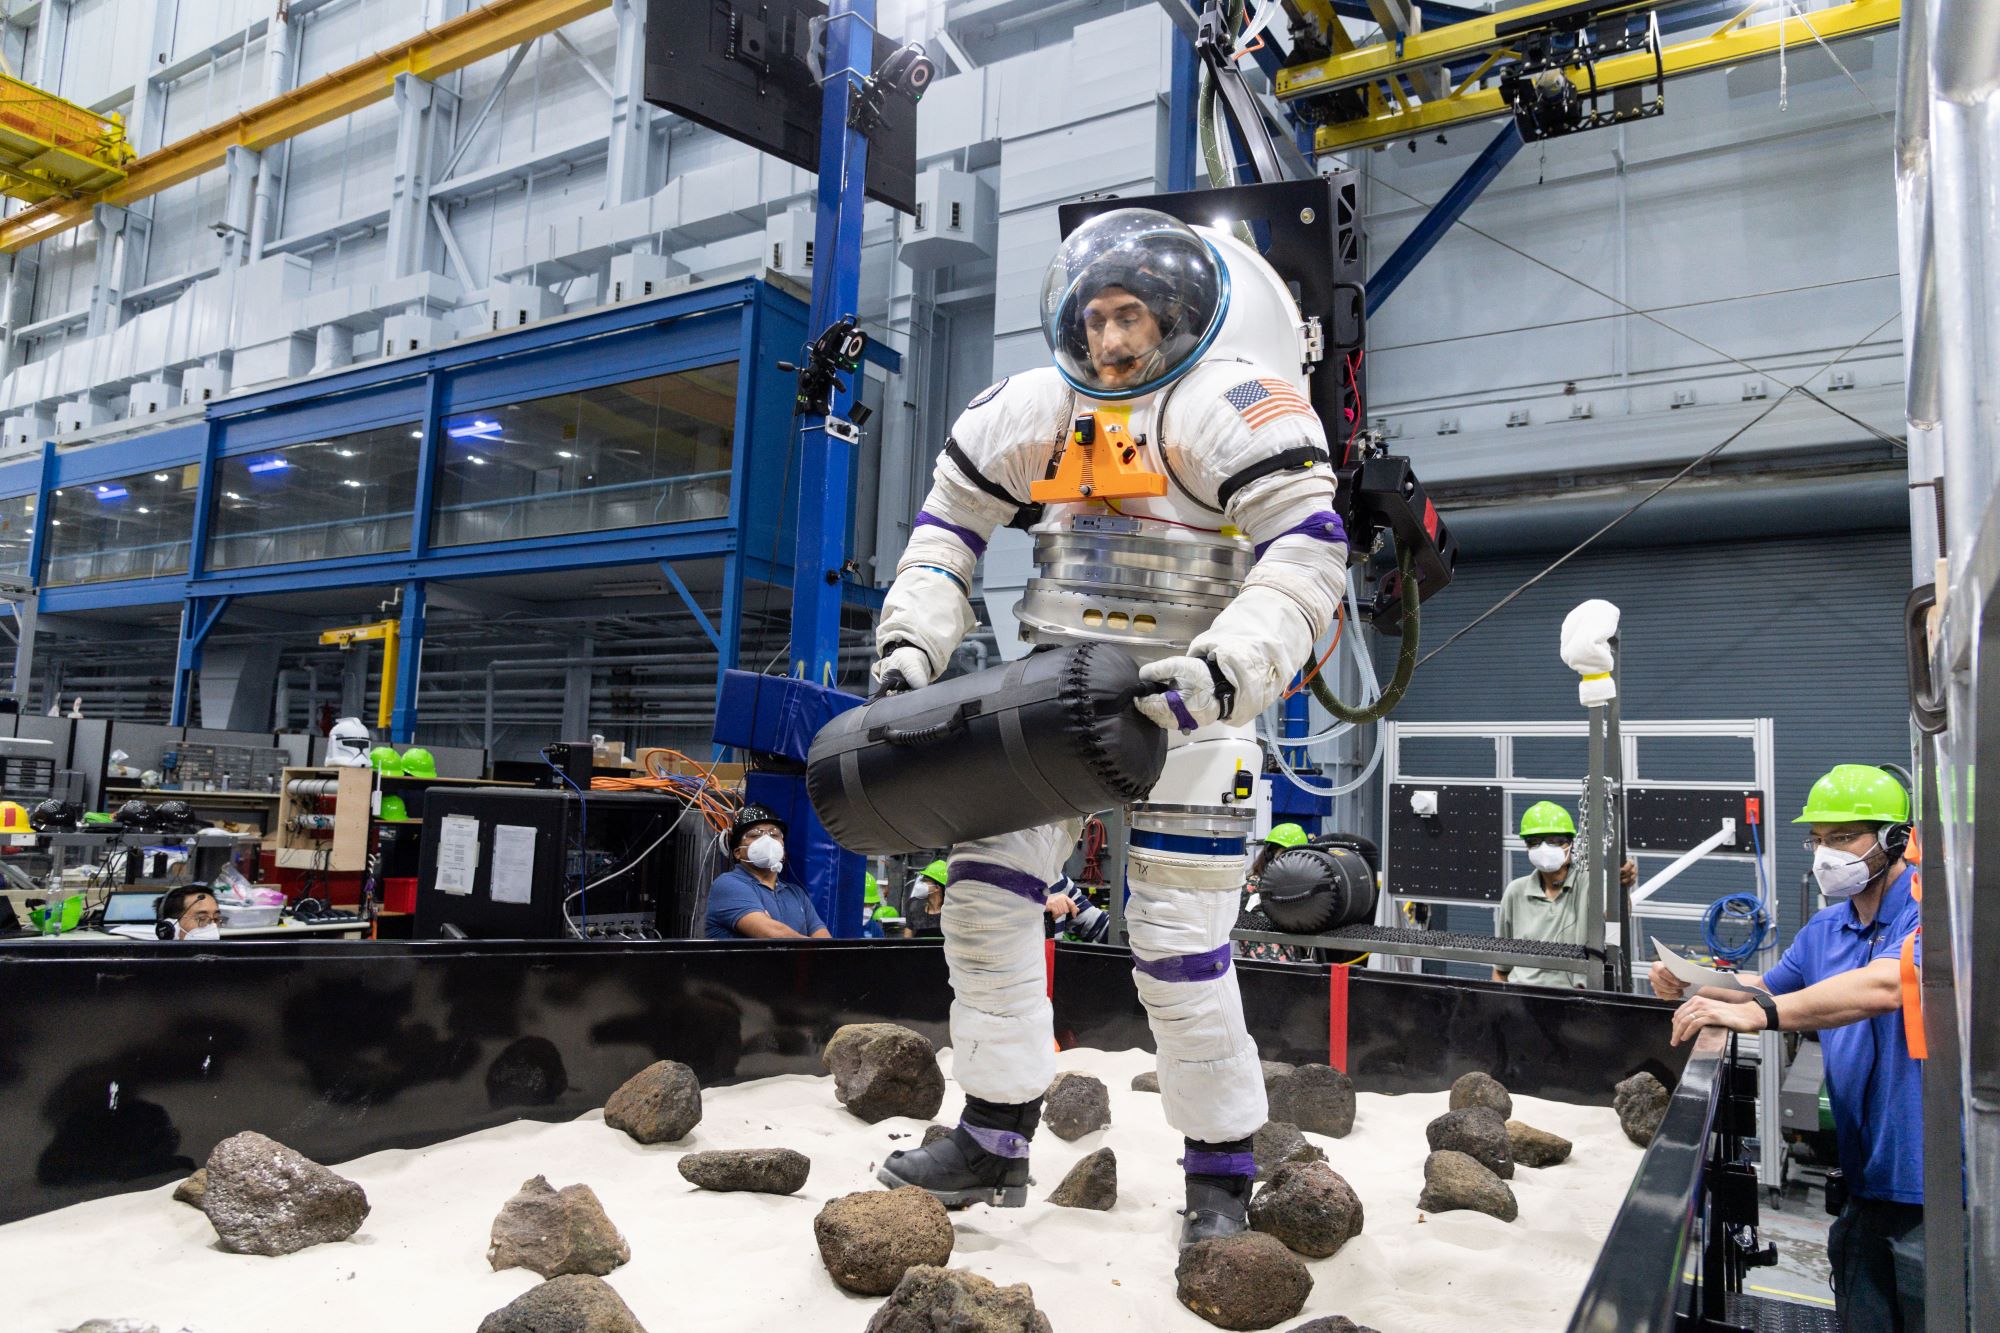 Houston We Have a Podcast: Ep. 290: Preparing Humans for Longer Spaceflights A volunteer from NASA’s Artemis Extravehicular Activity training group moves an object while in a spacesuit connected to NASA’s Active Response Gravity Offload System.